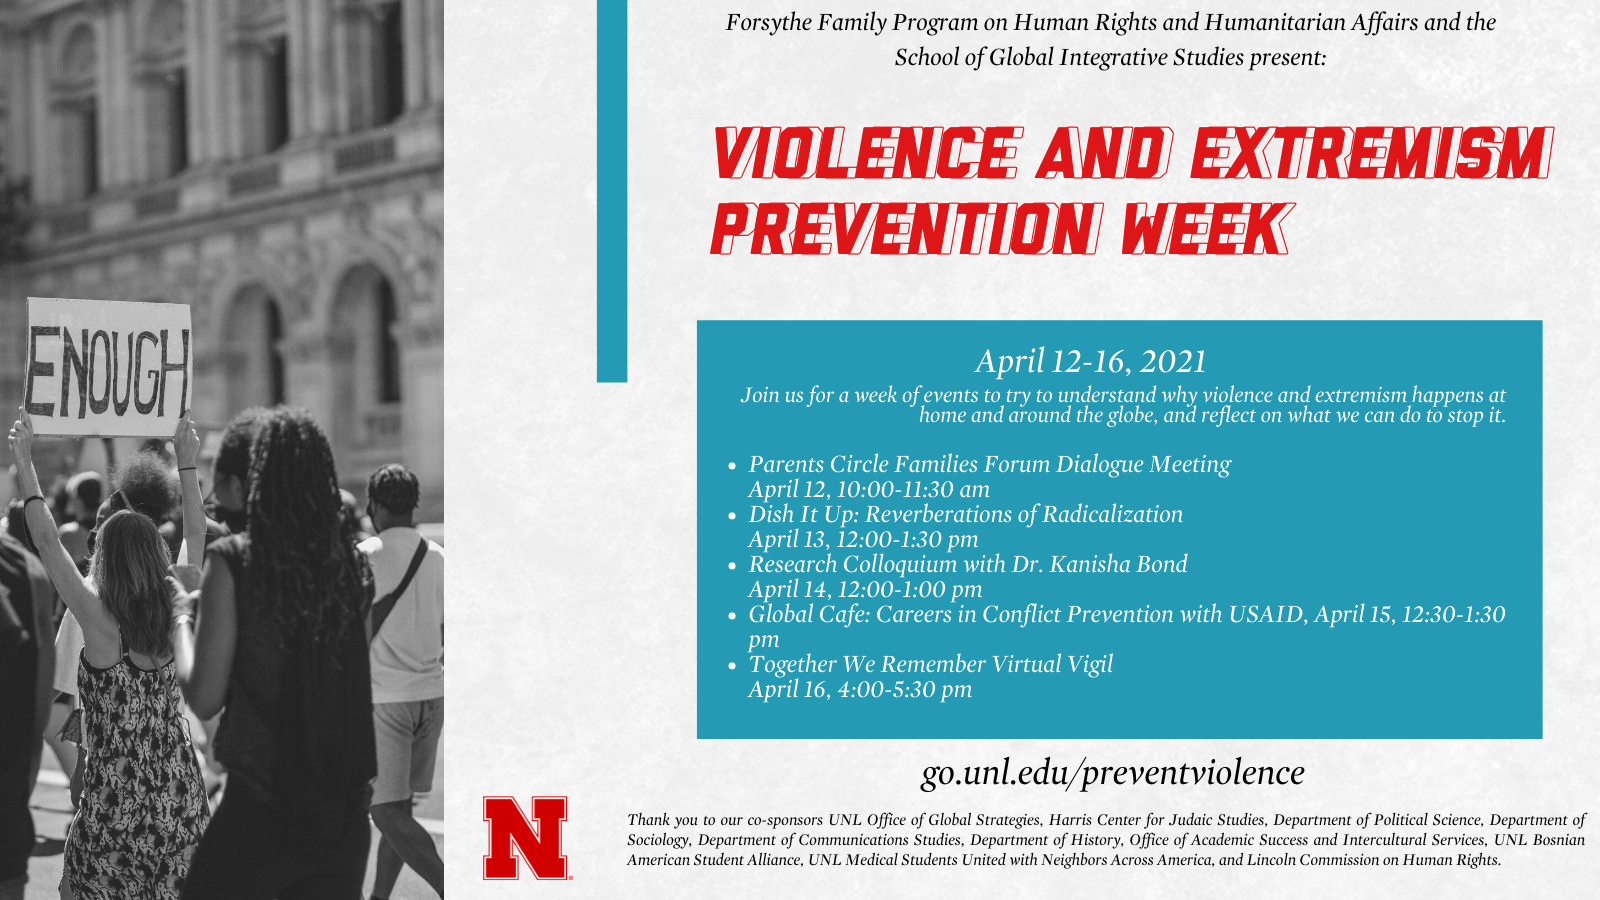 Violence and Extremism Prevention Week